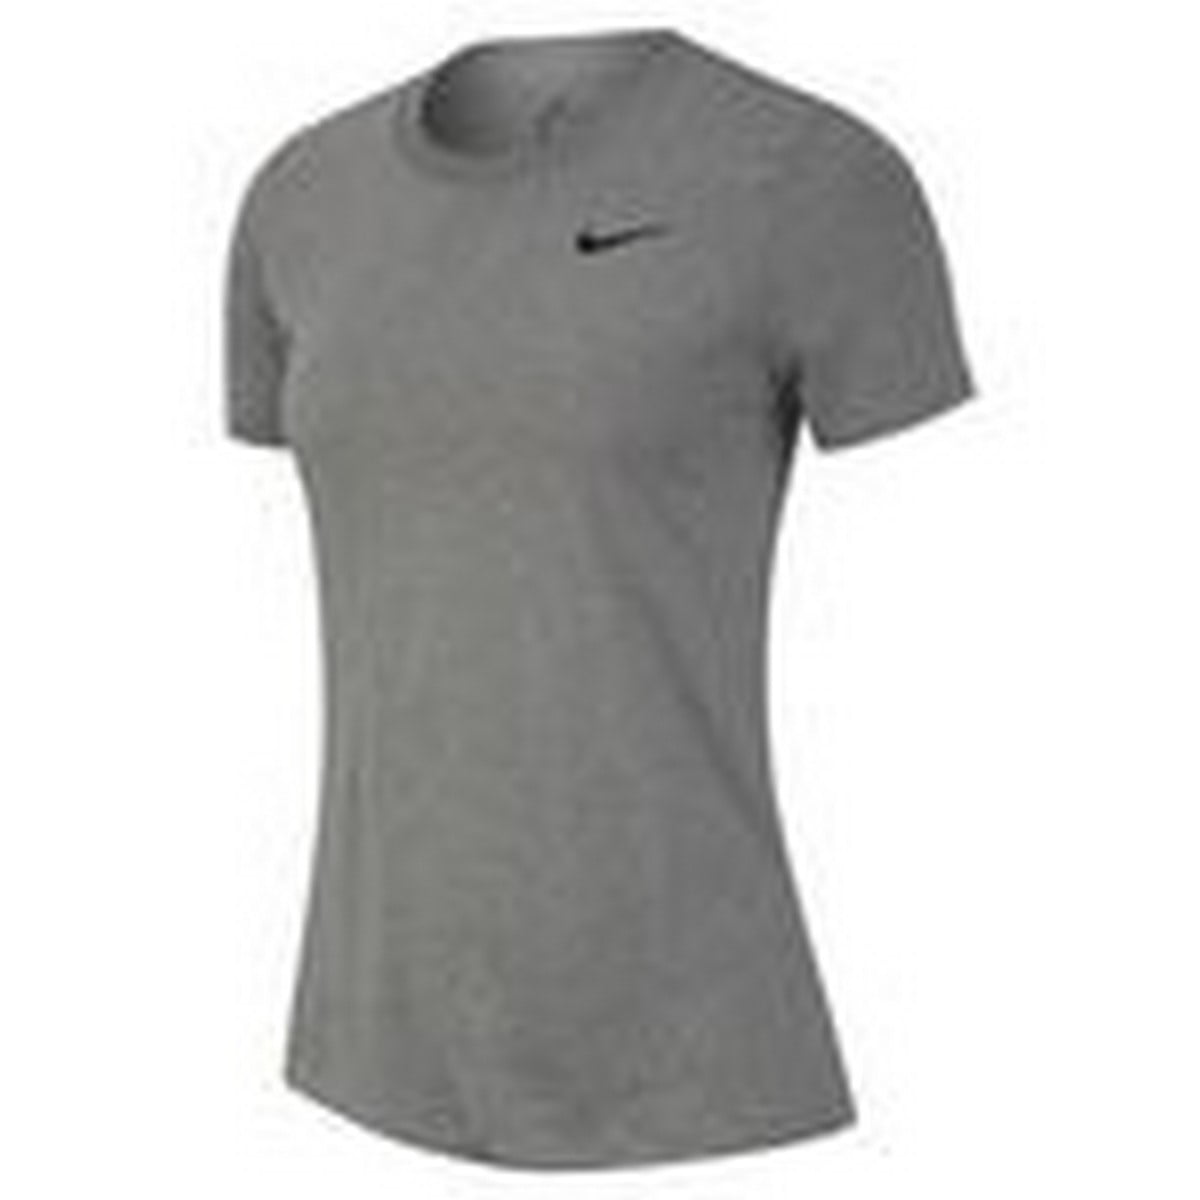 New Nike Women's Dri Fit Yoga Workout Gym T-shirt Athletic Top NWT Size  Small